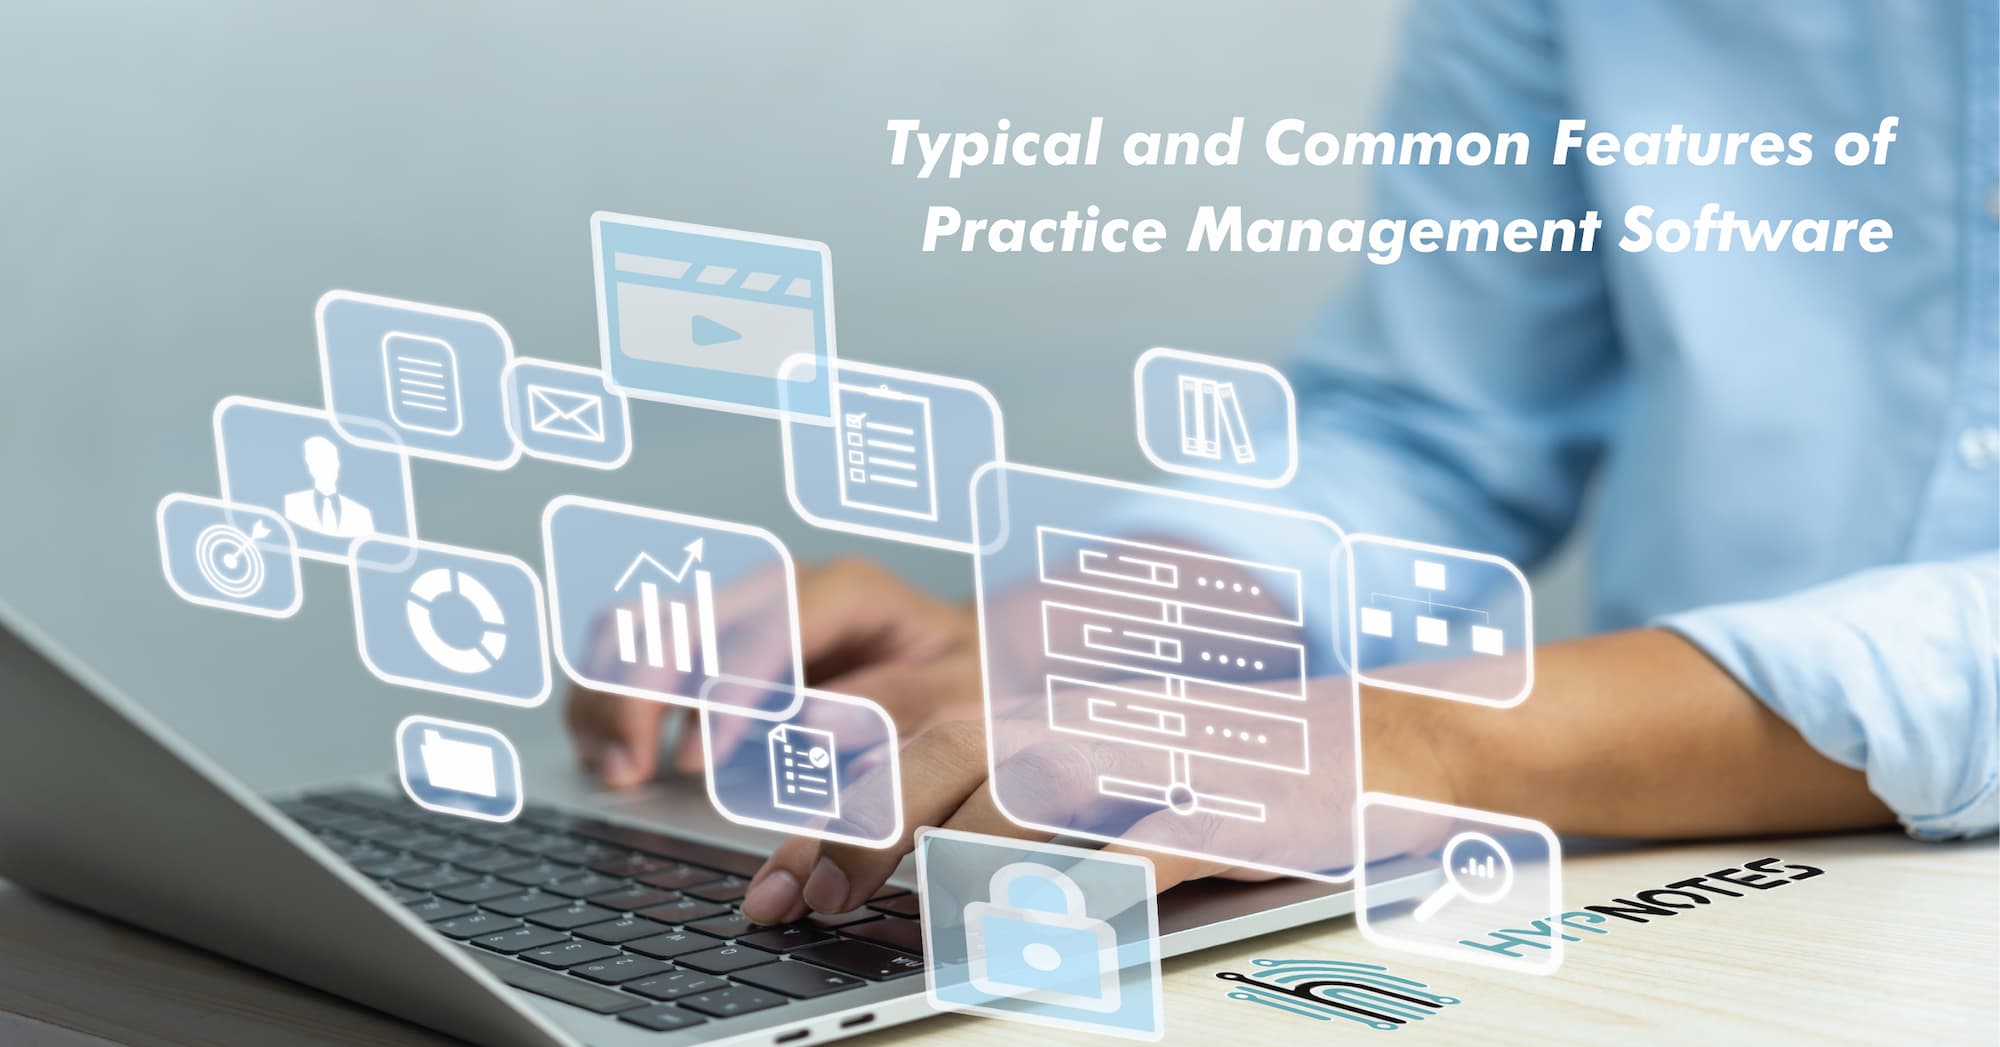 Typical and common features of practice management software (PMS) infographic 